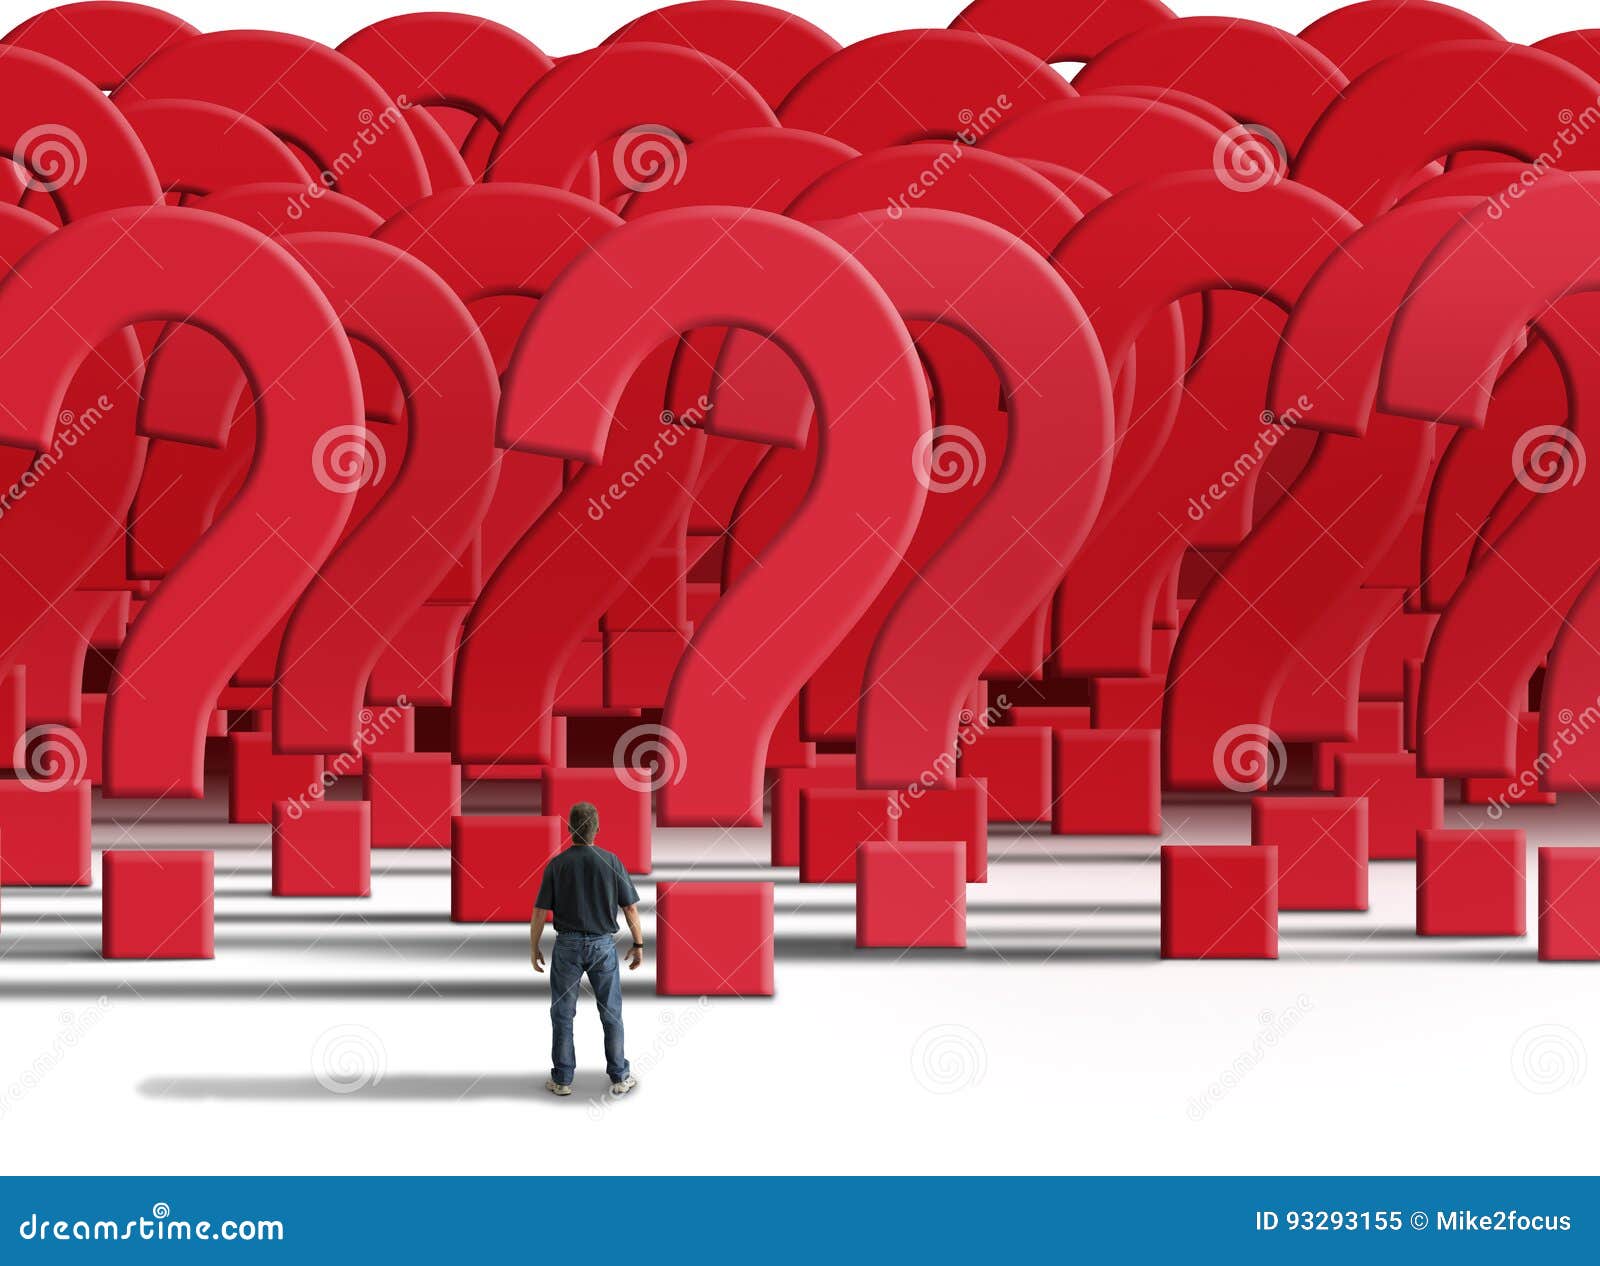 distraught man standing in front of a wall of question marks